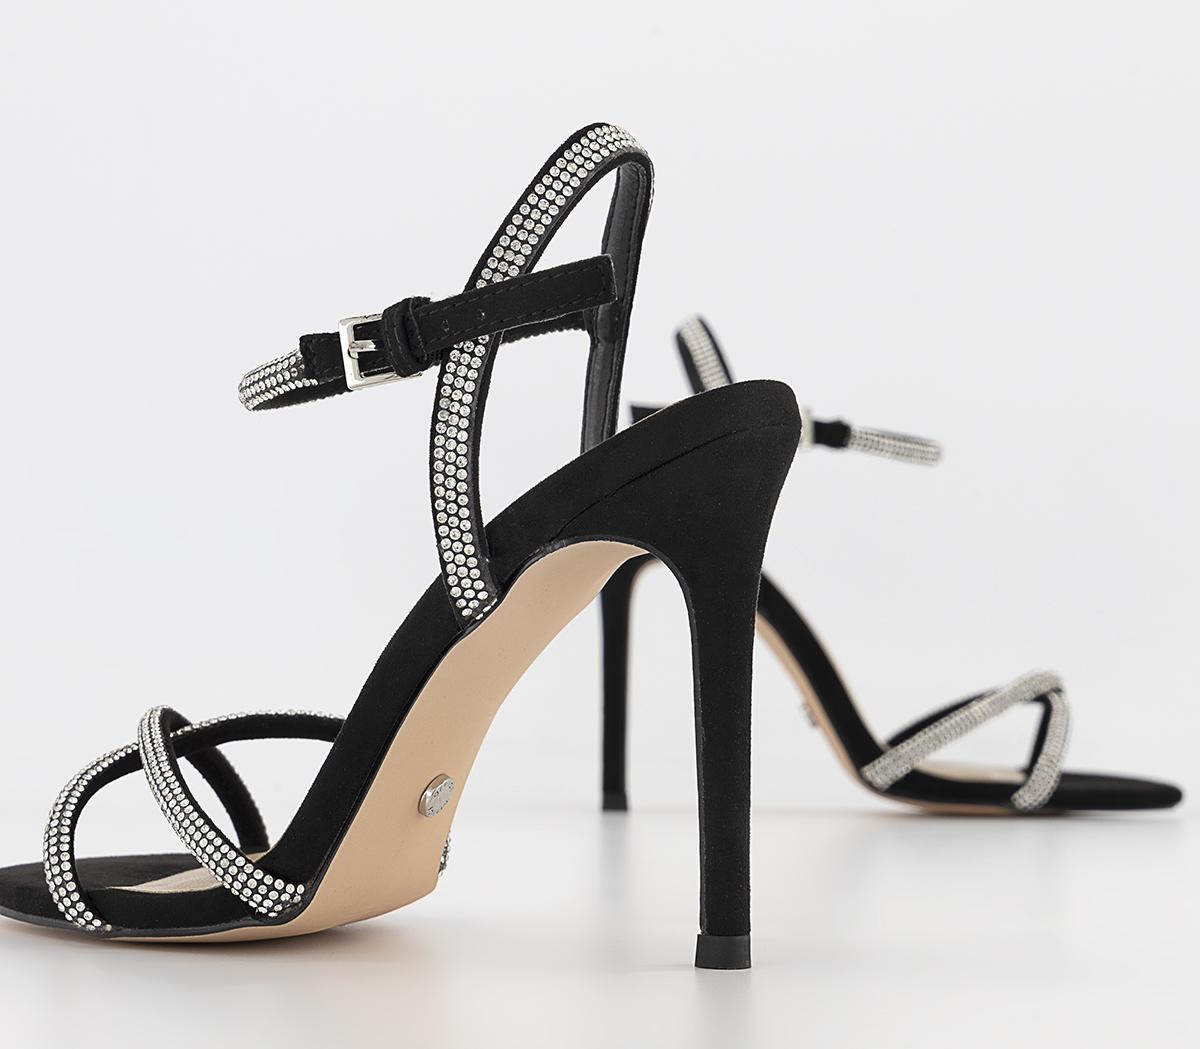 OFFICE Honor Strappy Two Part Stiletto Heels Black - High Heels